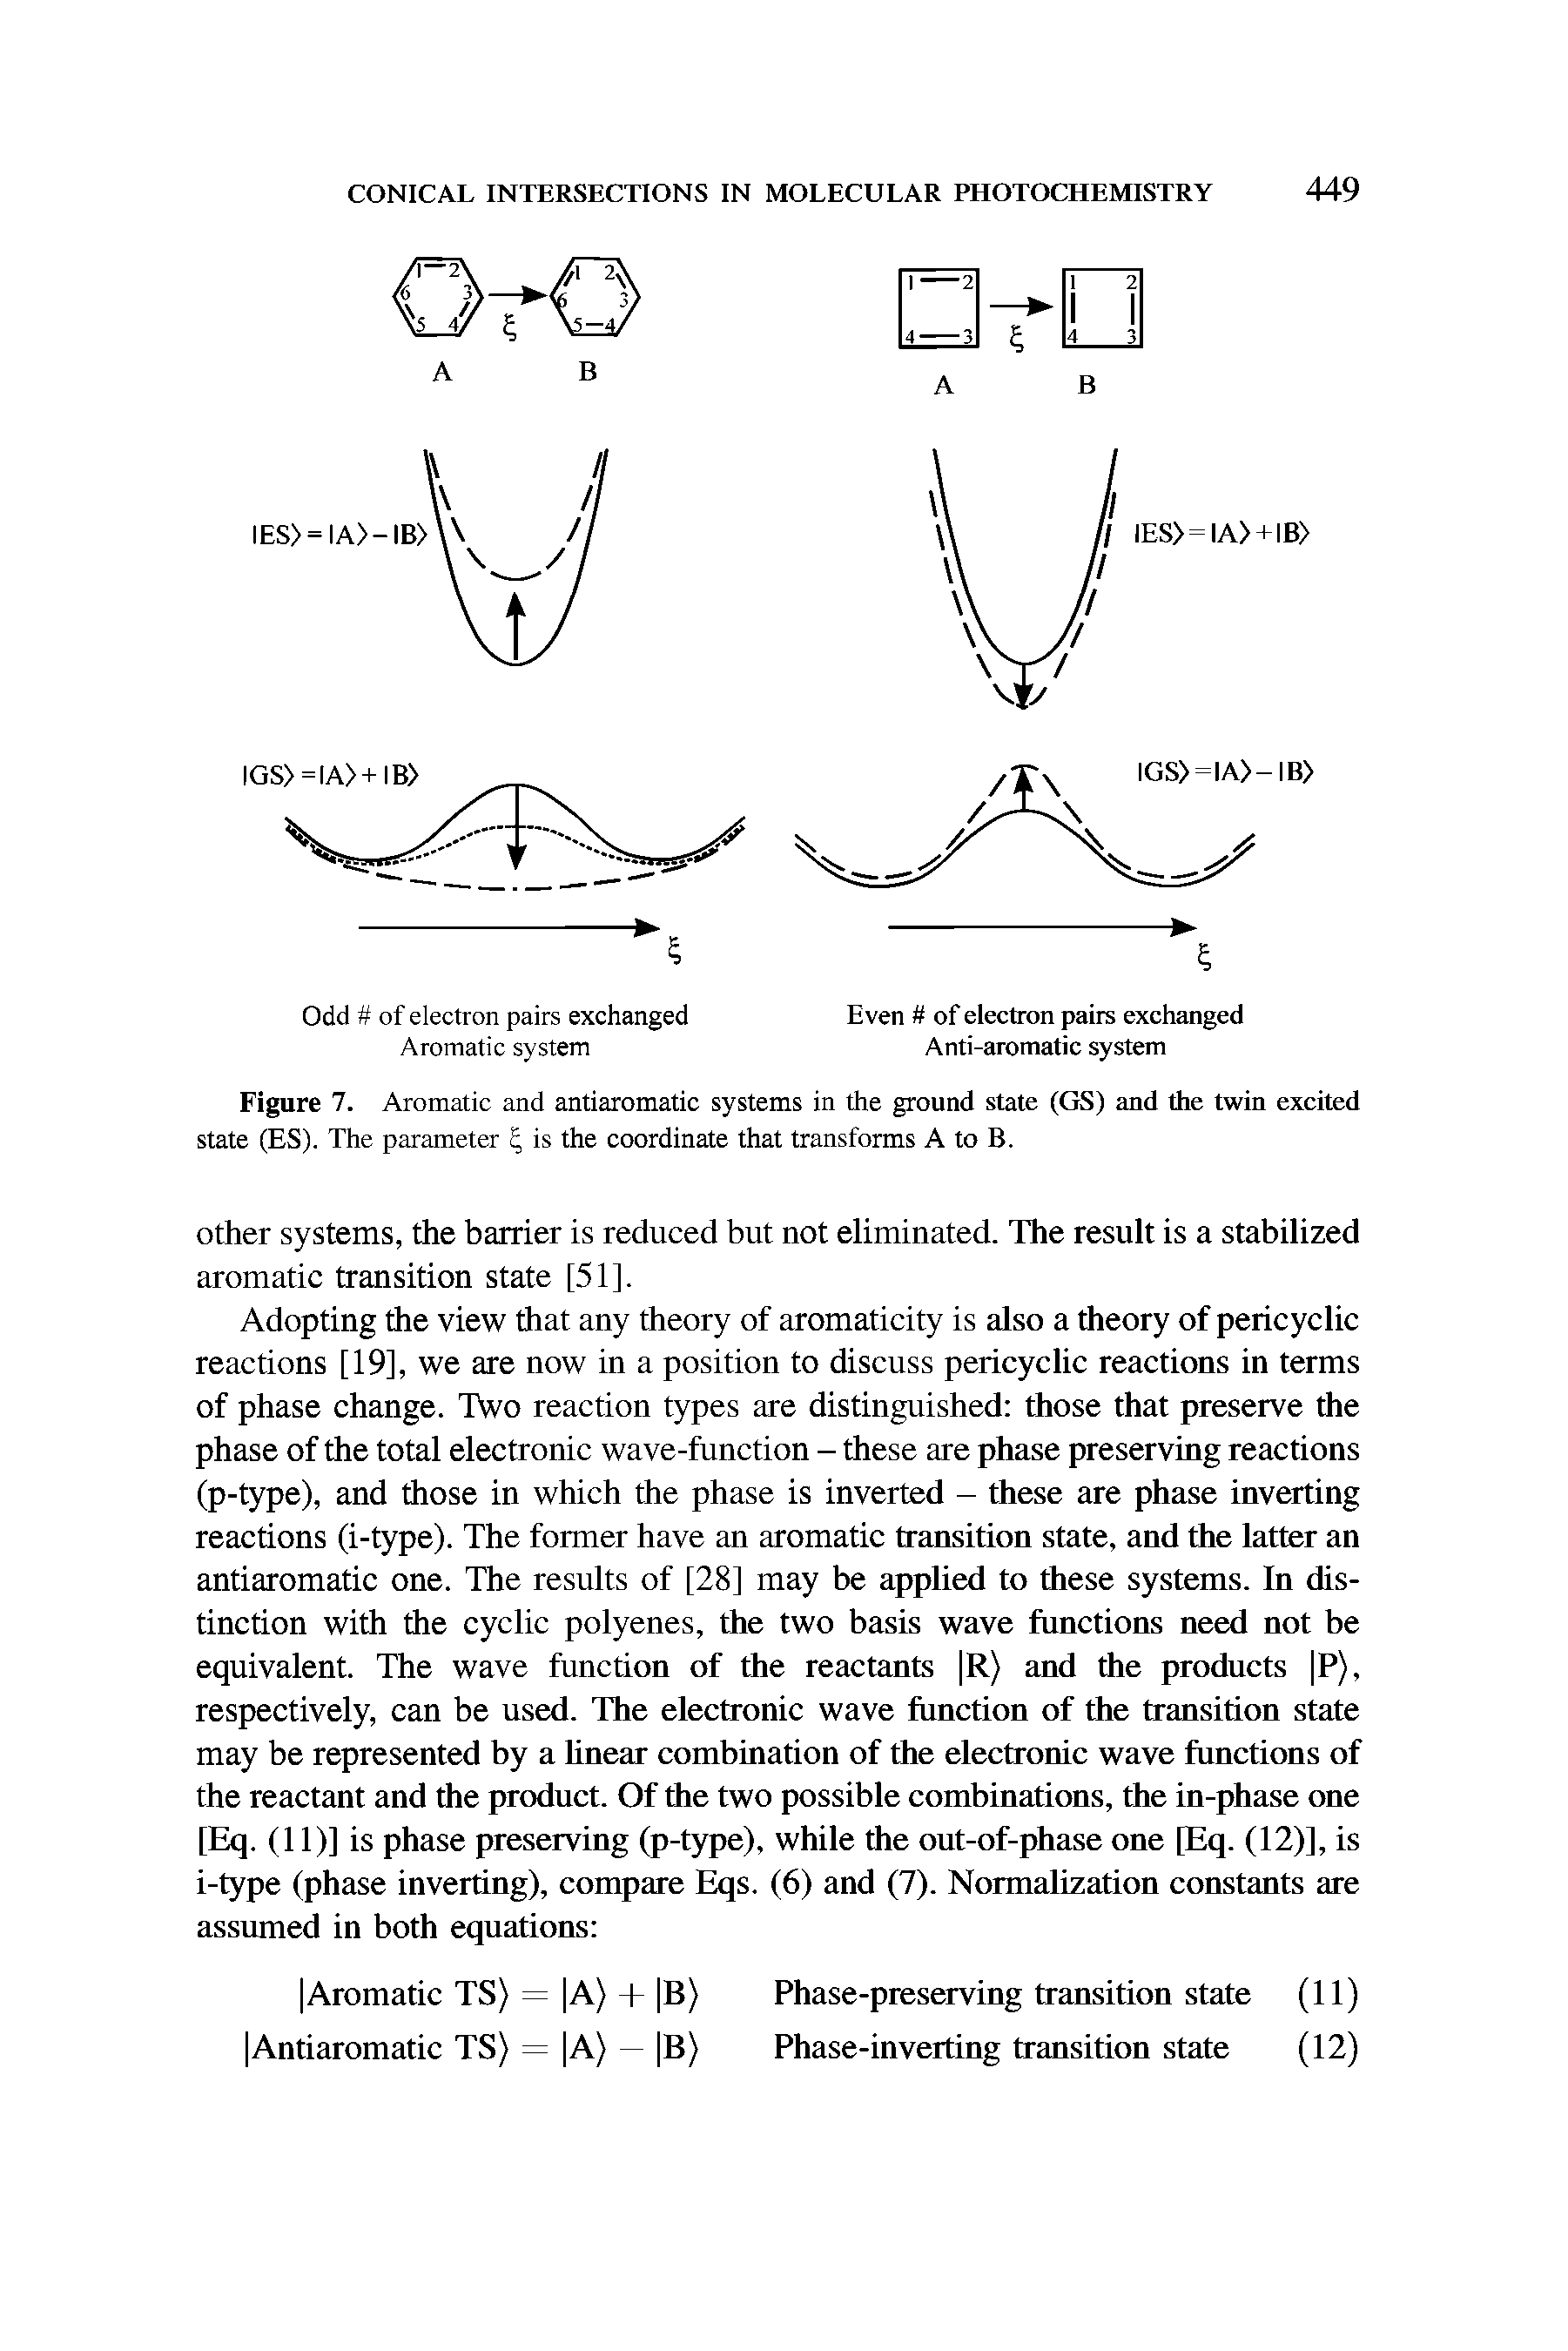 Figure 7. Aromatic and antiaromatic systems in the ground state (GS) and the twin excited state (ES). The parameter E, is the coordinate that transforms A to B.